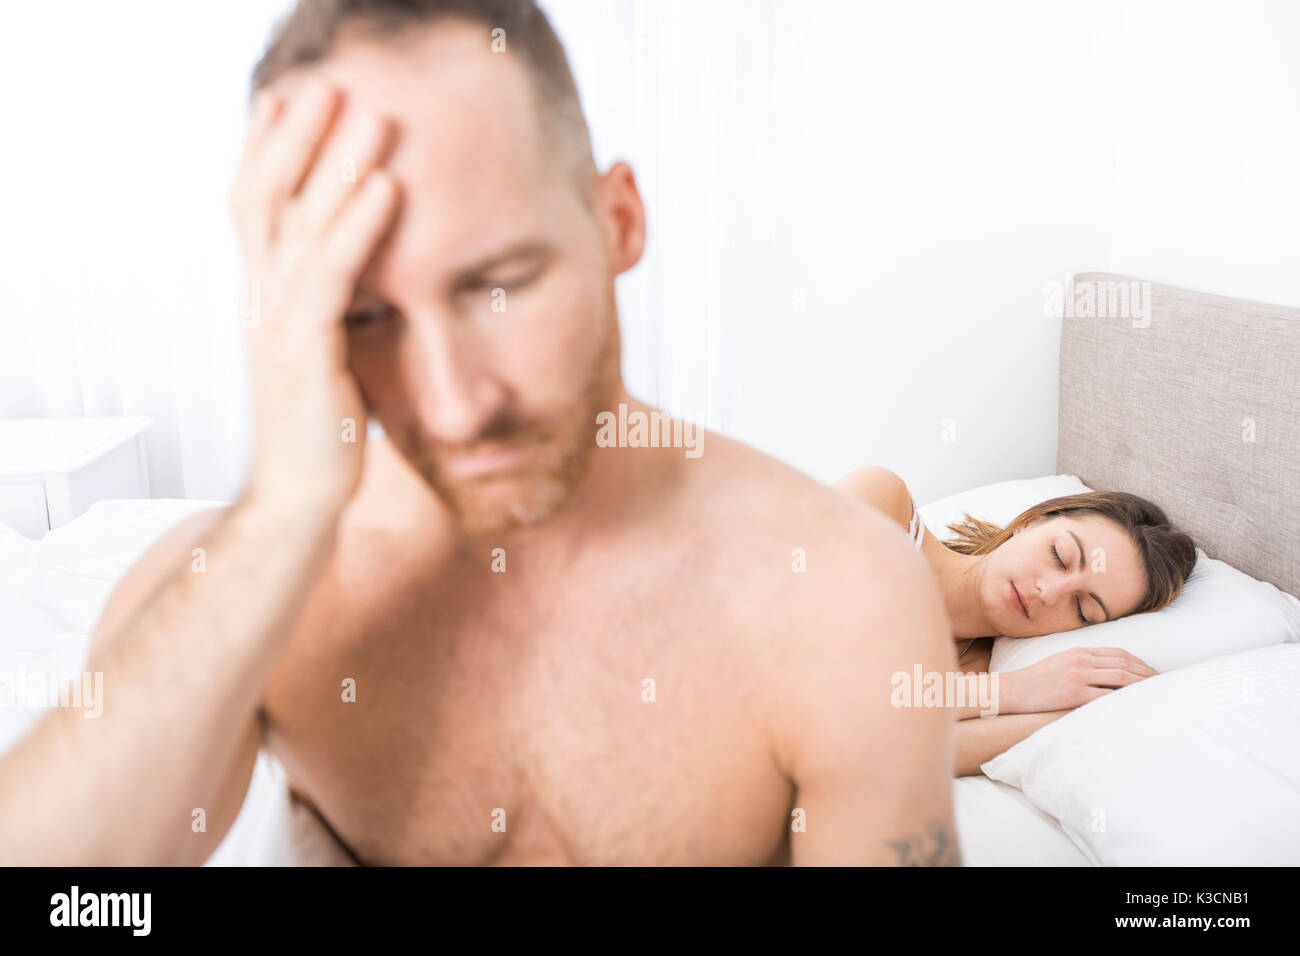 Depressed man sitting on the edge of the bed in bedroom Stock Photo